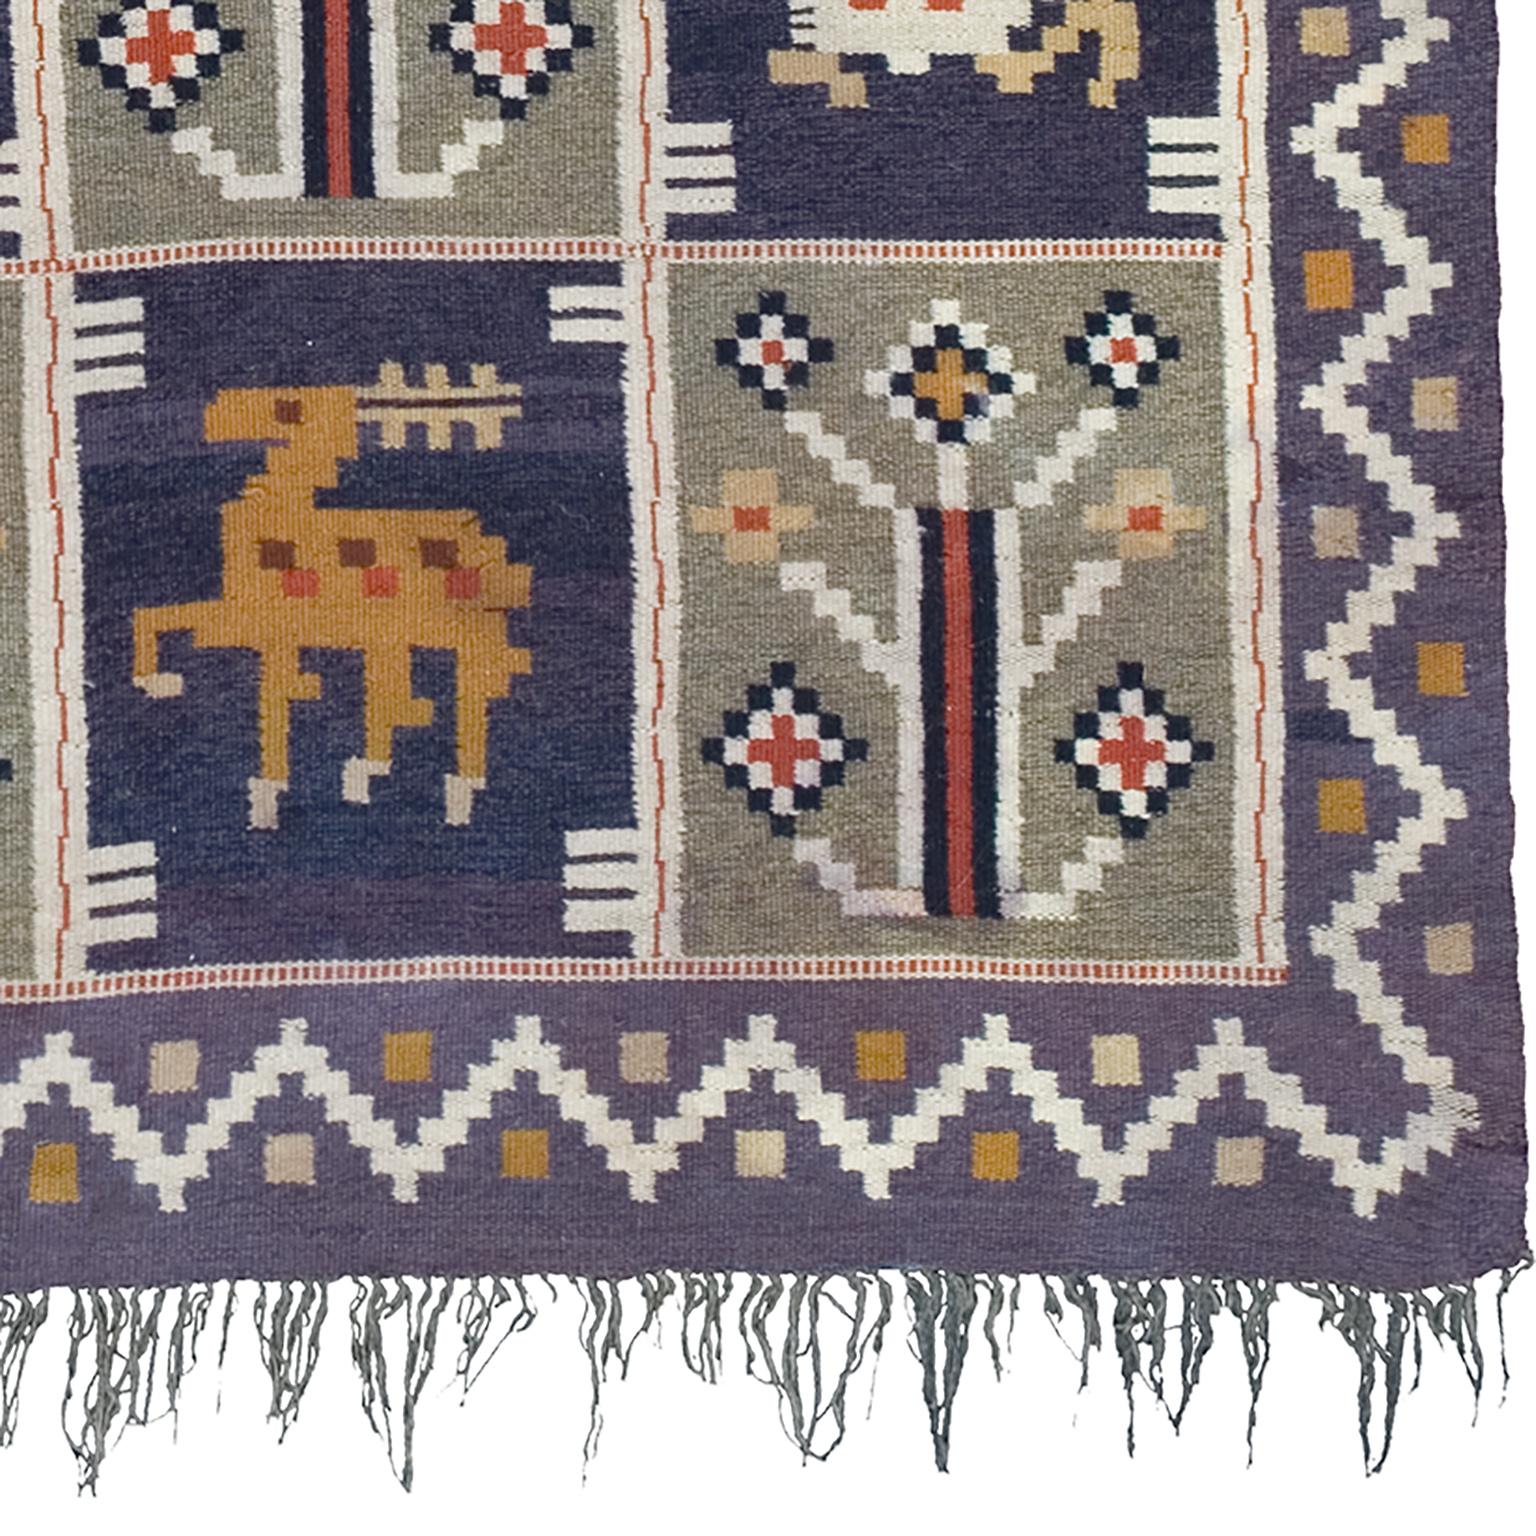 Early 20th century Swedish wall hanging
Sweden, circa 1900
Measures: 8'8